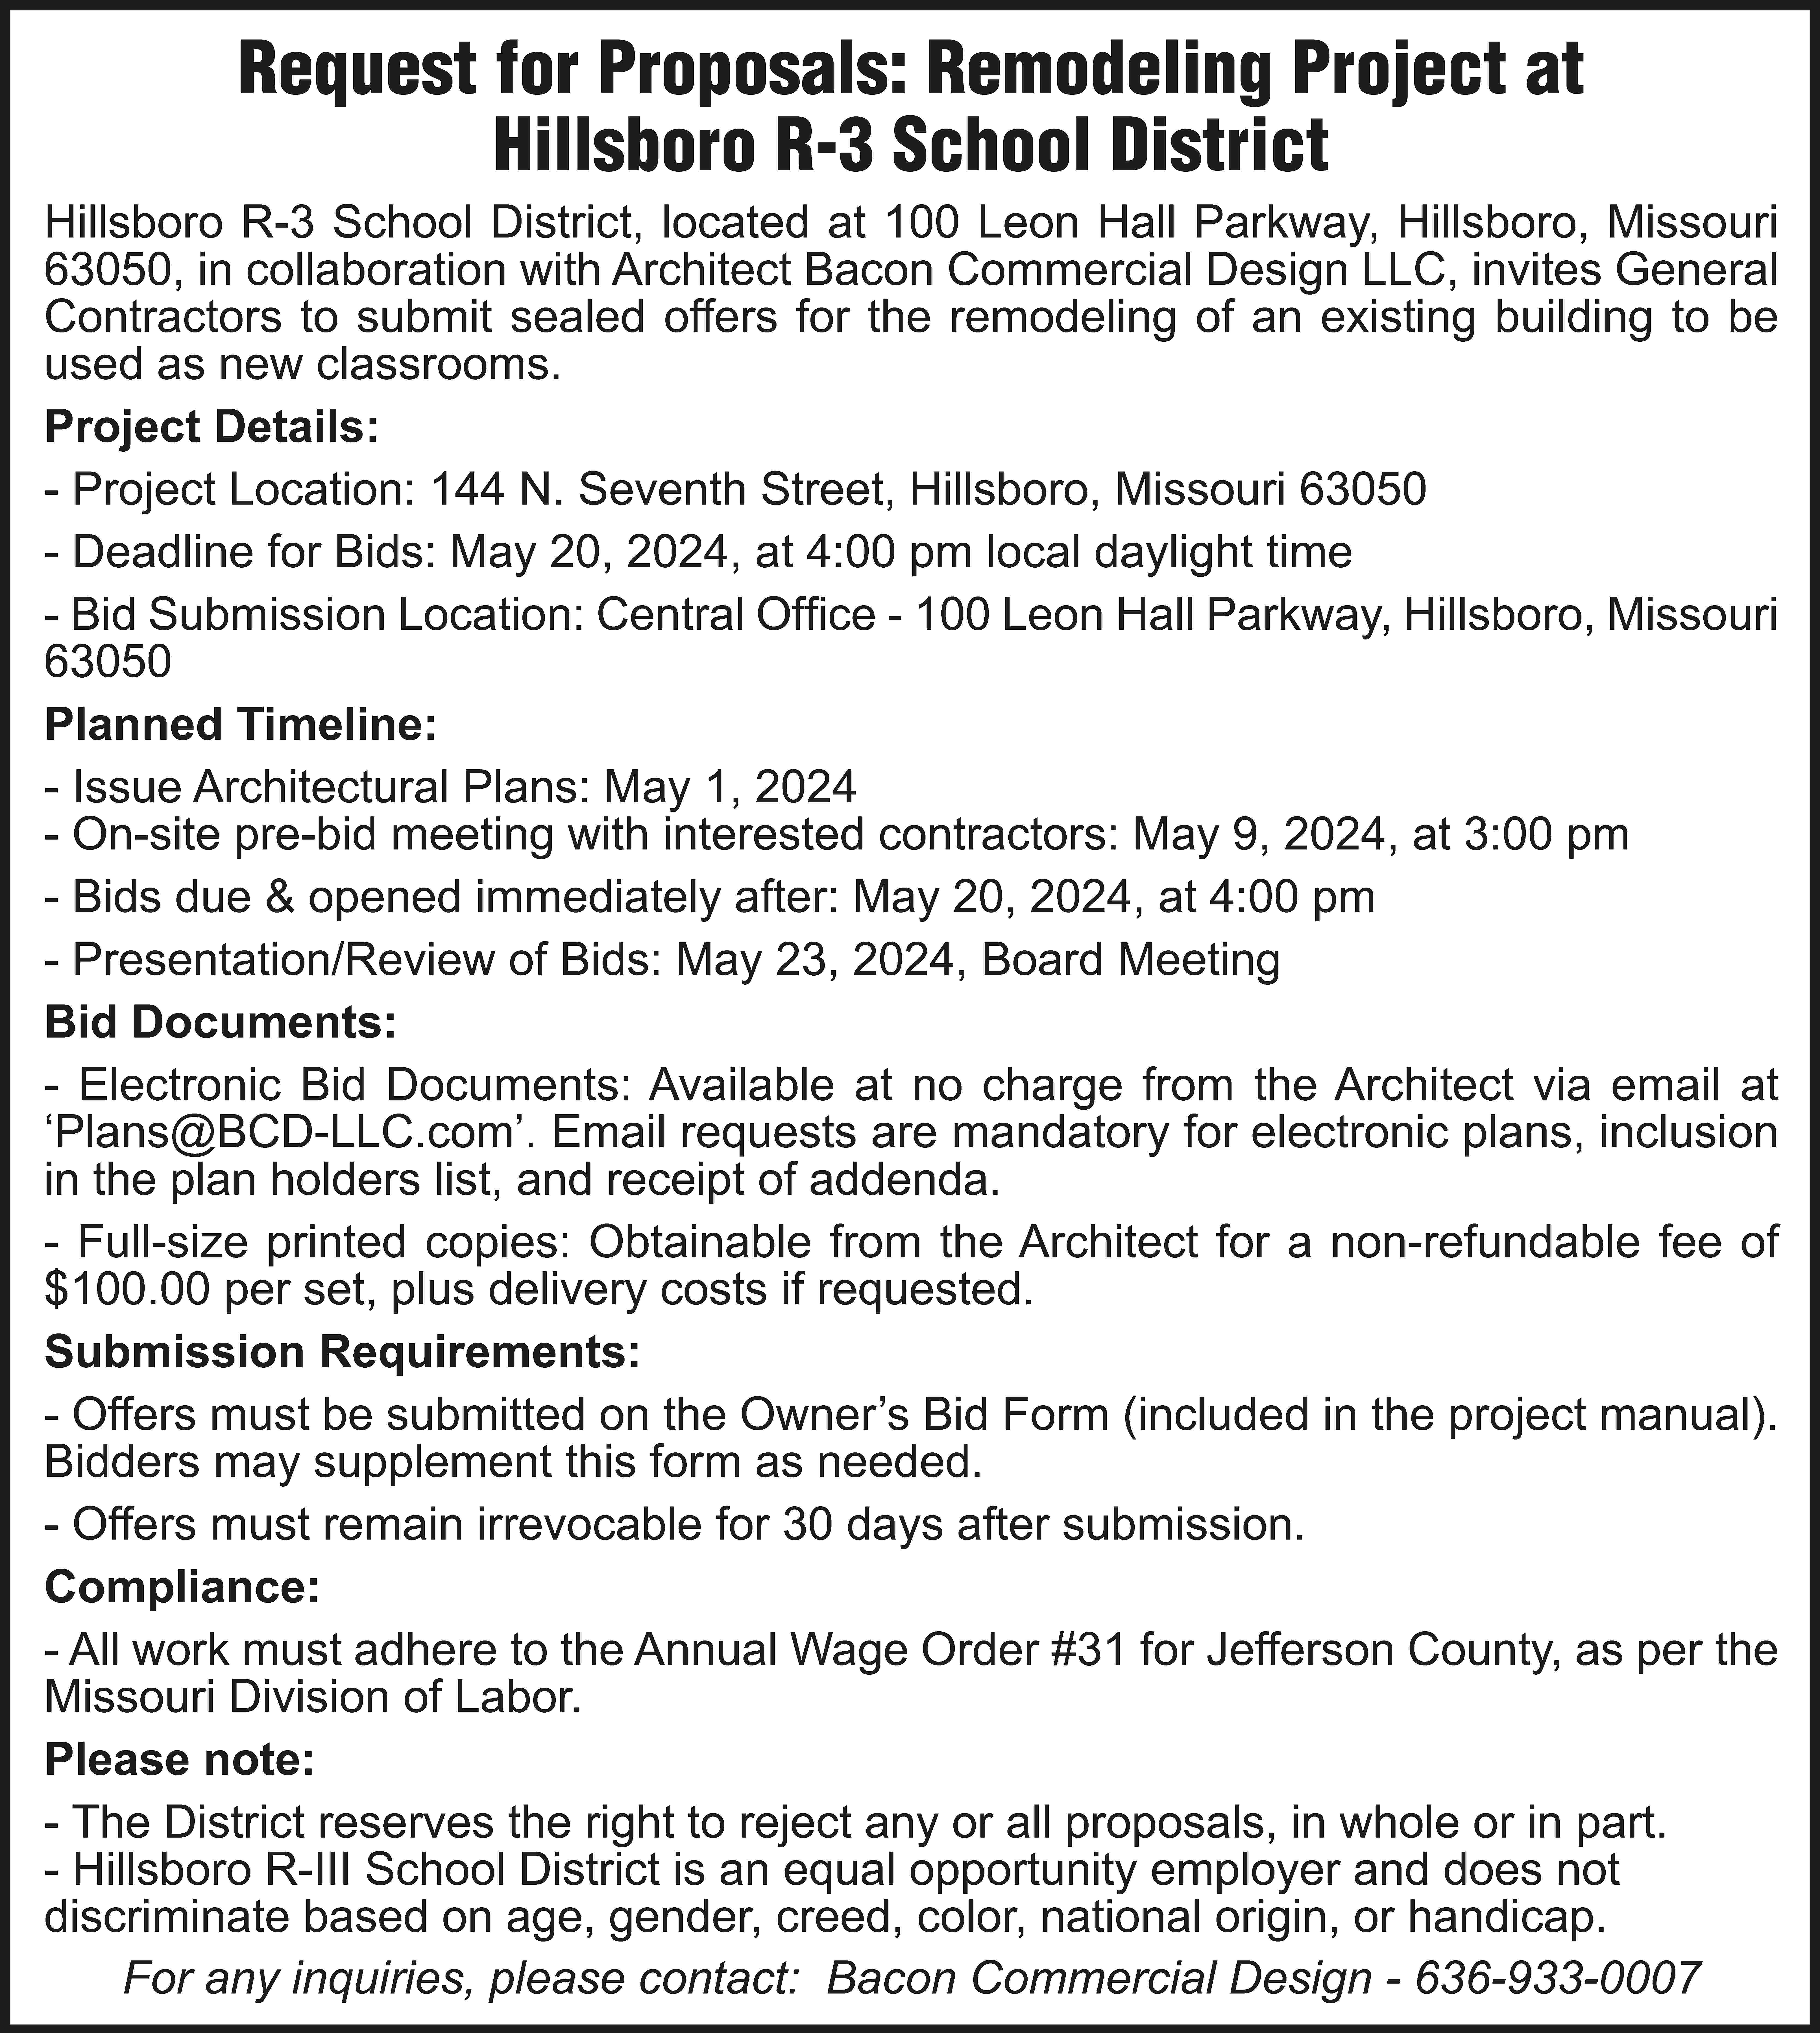 Request for Proposals: Remodeling Project  Request for Proposals: Remodeling Project at Hillsboro R-3 School District Hillsboro R-3 School District, located at 100 Leon Hall Parkway, Hillsboro, Missouri 63050, in collaboration with Architect Bacon Commercial Design LLC, invites General Contractors to submit sealed offers for the remodeling of an existing building to be used as new classrooms. Project Details: - Project Location: 144 N. Seventh Street, Hillsboro, Missouri 63050 - Deadline for Bids: May 20, 2024, at 4:00 pm local daylight time - Bid Submission Location: Central Office - 100 Leon Hall Parkway, Hillsboro, Missouri 63050 Planned Timeline: - Issue Architectural Plans: May 1, 2024 - On-site pre-bid meeting with interested contractors: May 9, 2024, at 3:00 pm - Bids due & opened immediately after: May 20, 2024, at 4:00 pm - Presentation/Review of Bids: May 23, 2024, Board Meeting Bid Documents: - Electronic Bid Documents: Available at no charge from the Architect via email at ‘Plans@BCD-LLC.com’. Email requests are mandatory for electronic plans, inclusion in the plan holders list, and receipt of addenda. - Full-size printed copies: Obtainable from the Architect for a non-refundable fee of $100.00 per set, plus delivery costs if requested. Submission Requirements: - Offers must be submitted on the Owner’s Bid Form (included in the project manual). Bidders may supplement this form as needed. - Offers must remain irrevocable for 30 days after submission. Compliance: - All work must adhere to the Annual Wage Order #31 for Jefferson County, as per the Missouri Division of Labor. Please note: - The District reserves the right to reject any or all proposals, in whole or in part. - Hillsboro R-III School District is an equal opportunity employer and does not discriminate based on age, gender, creed, color, national origin, or handicap. For any inquiries, please contact: Bacon Commercial Design - 636-933-0007